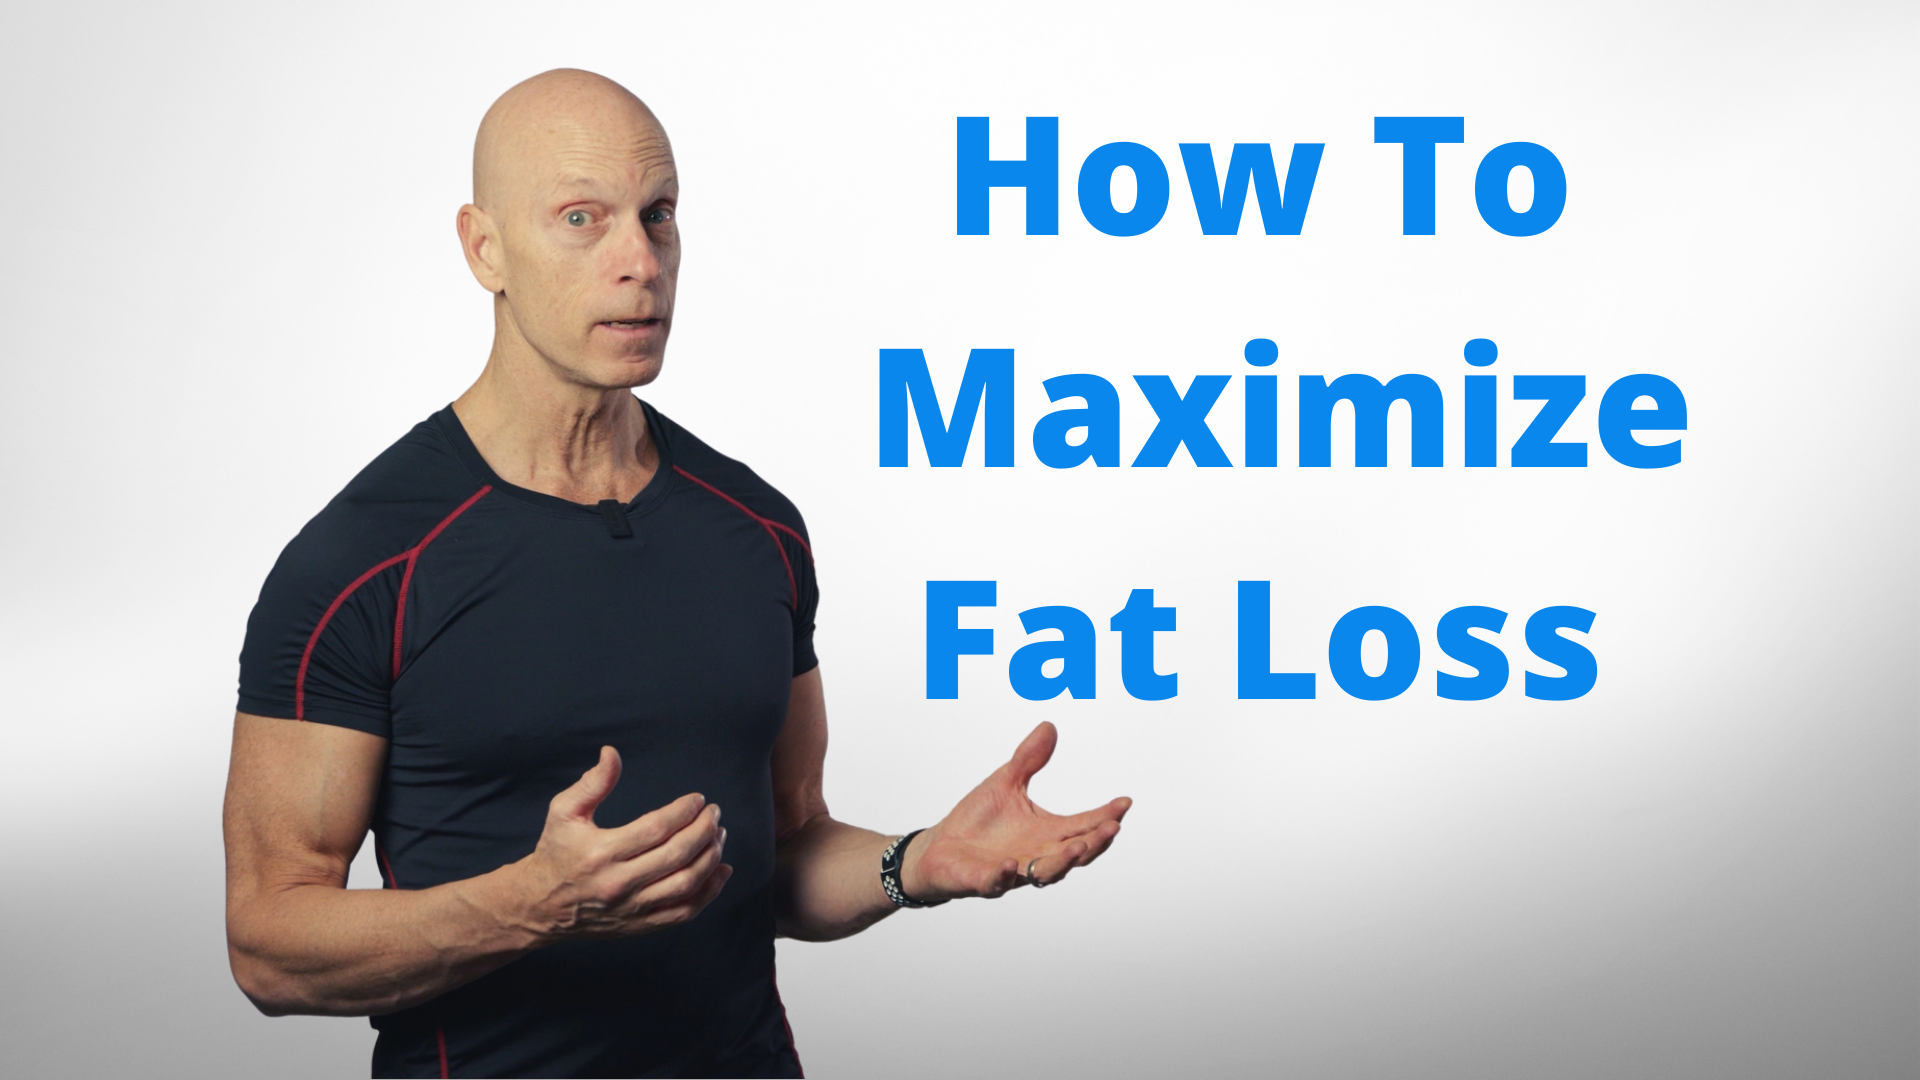 How To Maximize Fat Loss